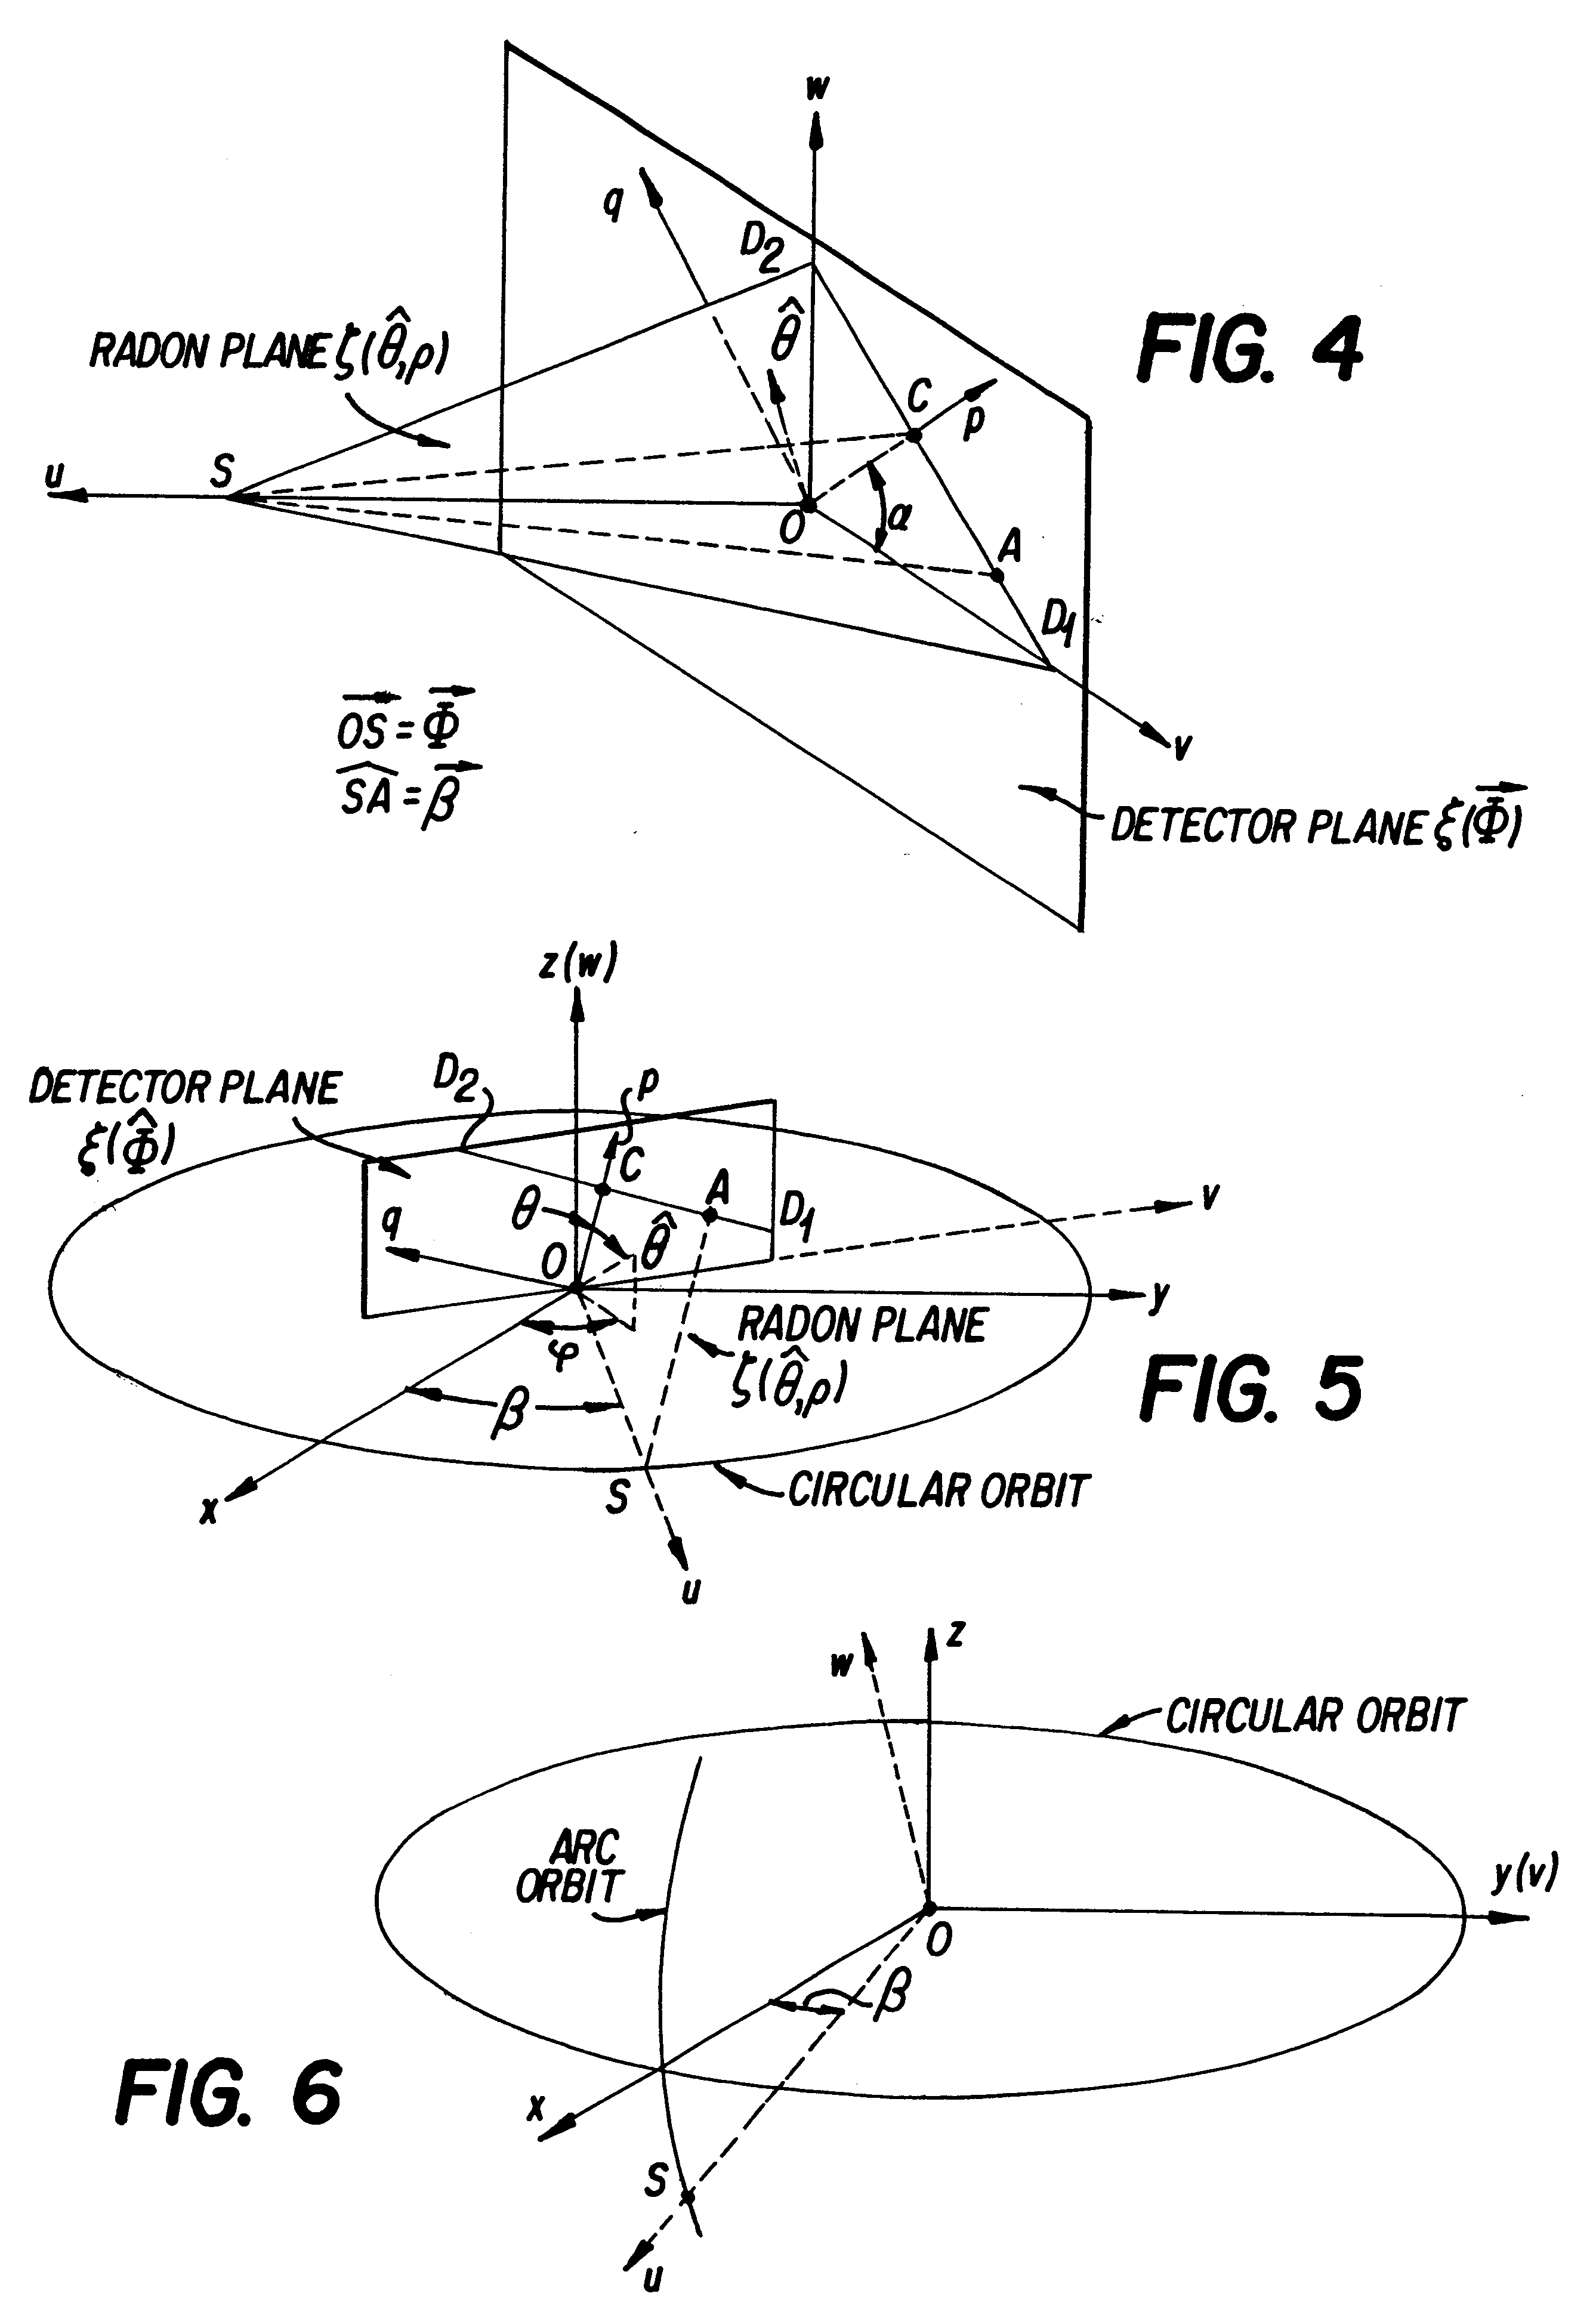 Cone beam volume CT angiography imaging system and method